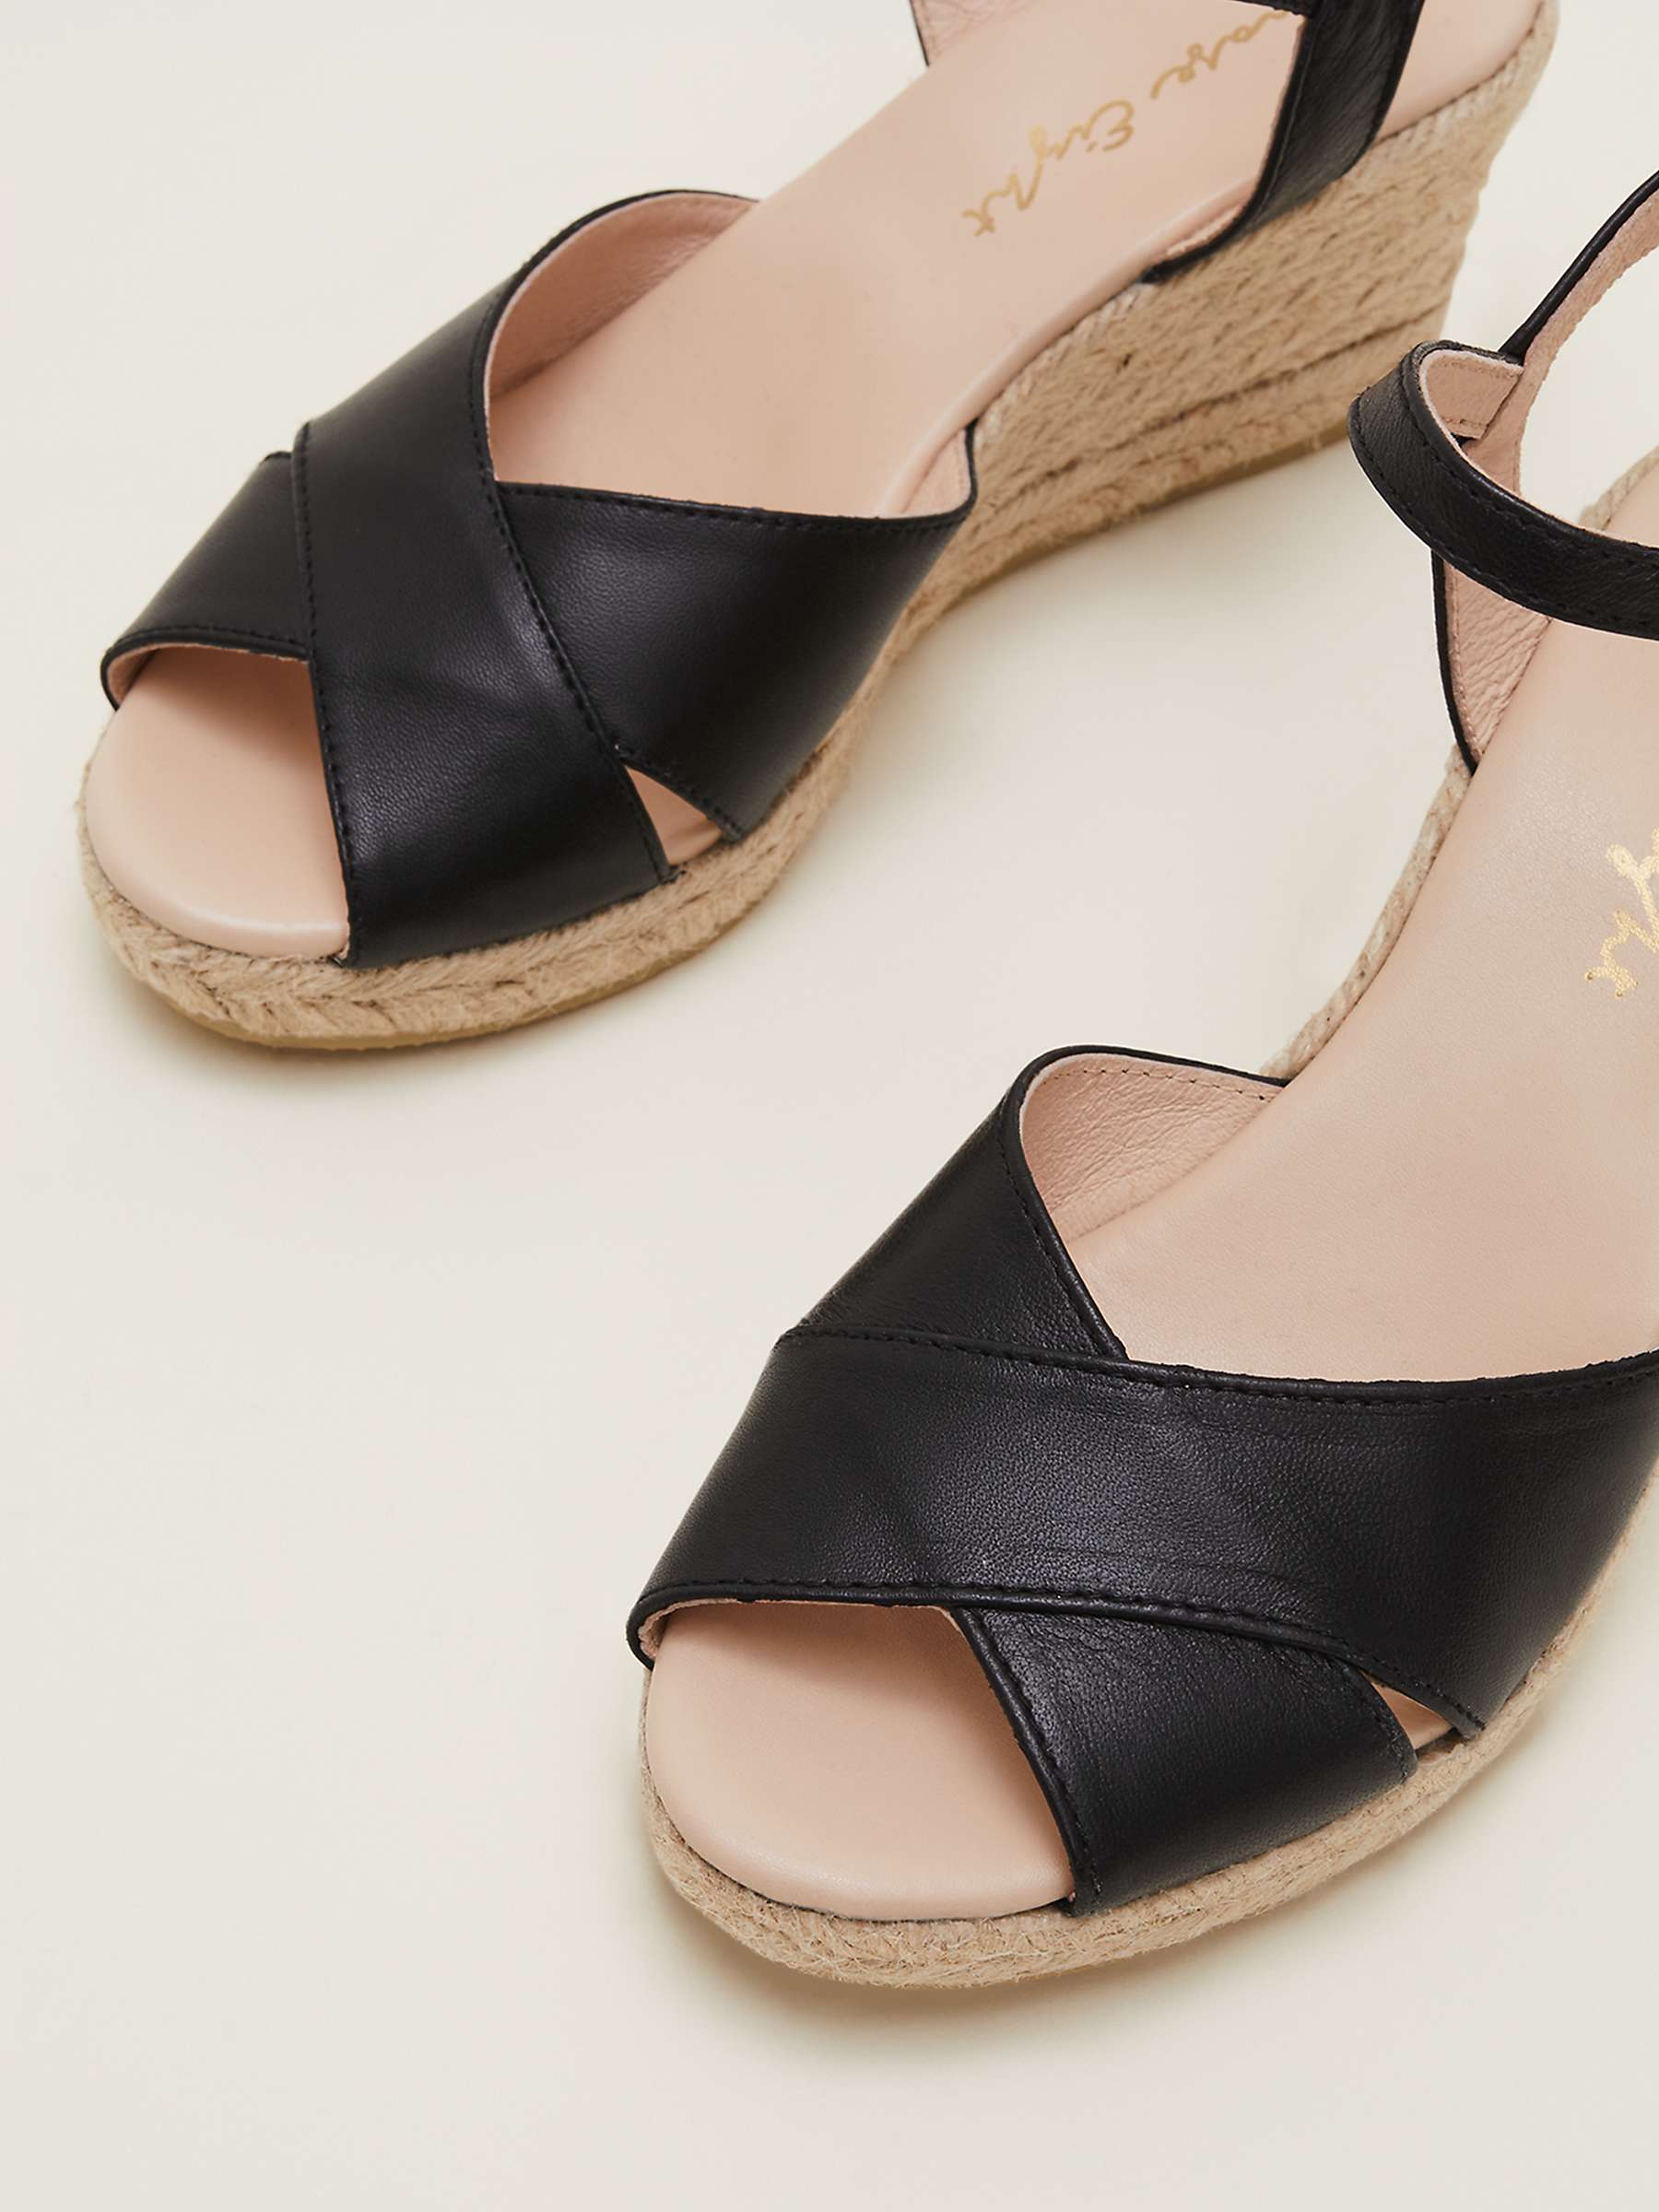 Buy Phase Eight Leather Espadrilles, Black Online at johnlewis.com